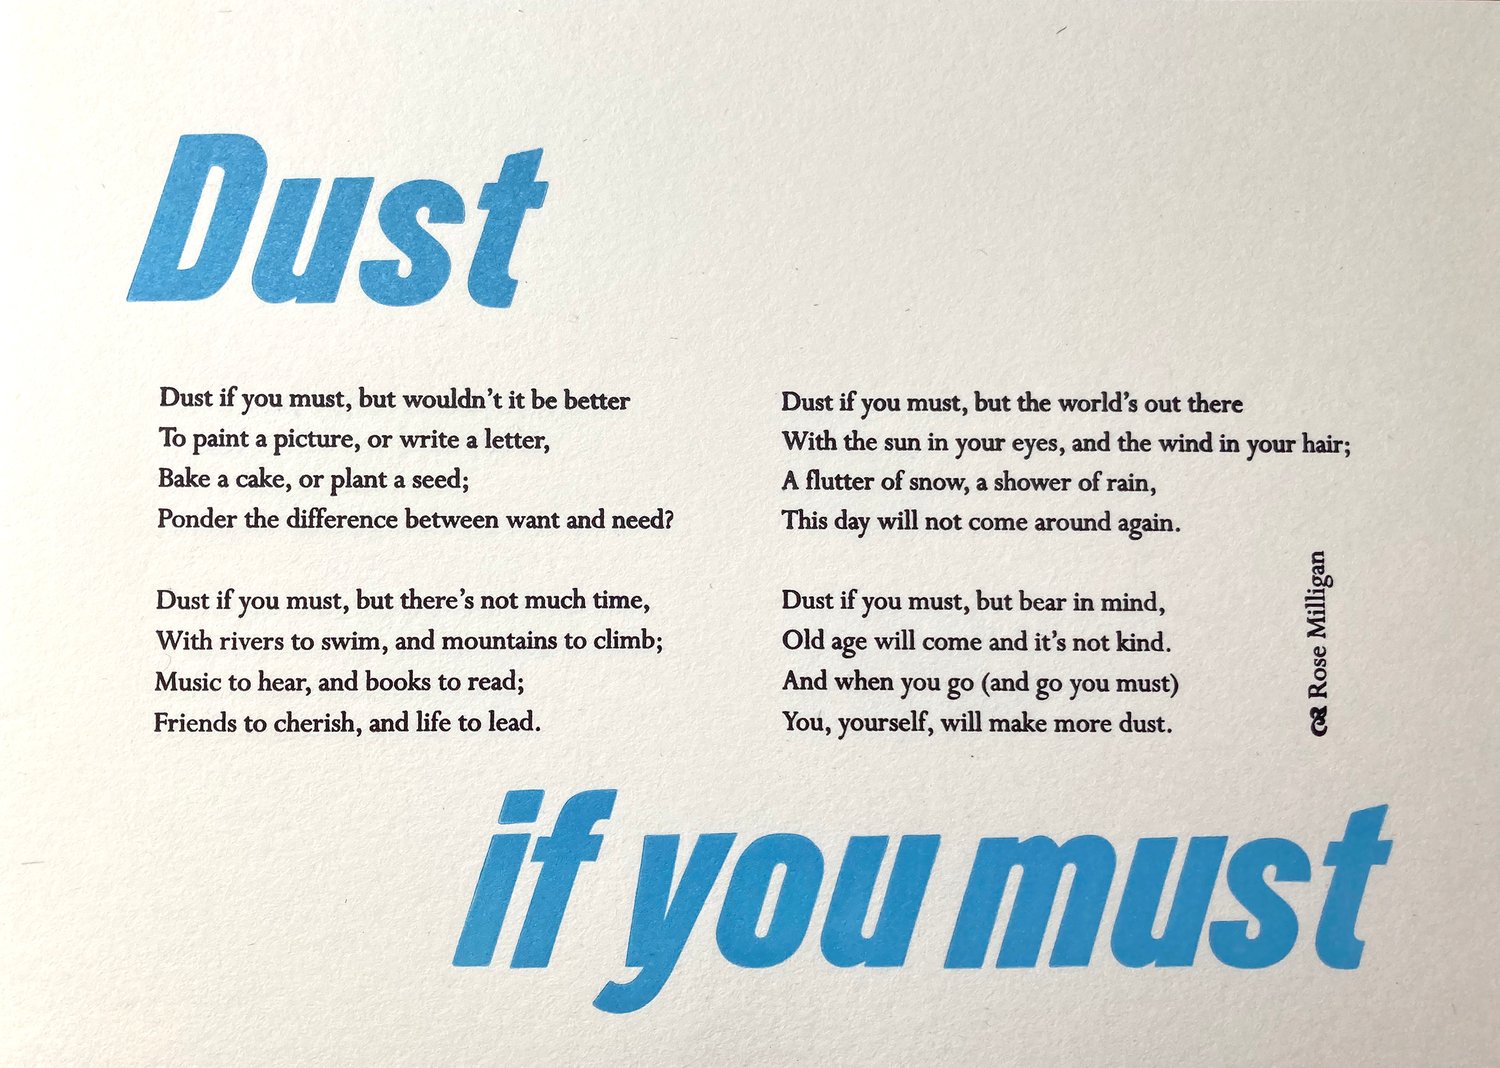 Image of Dust if you must